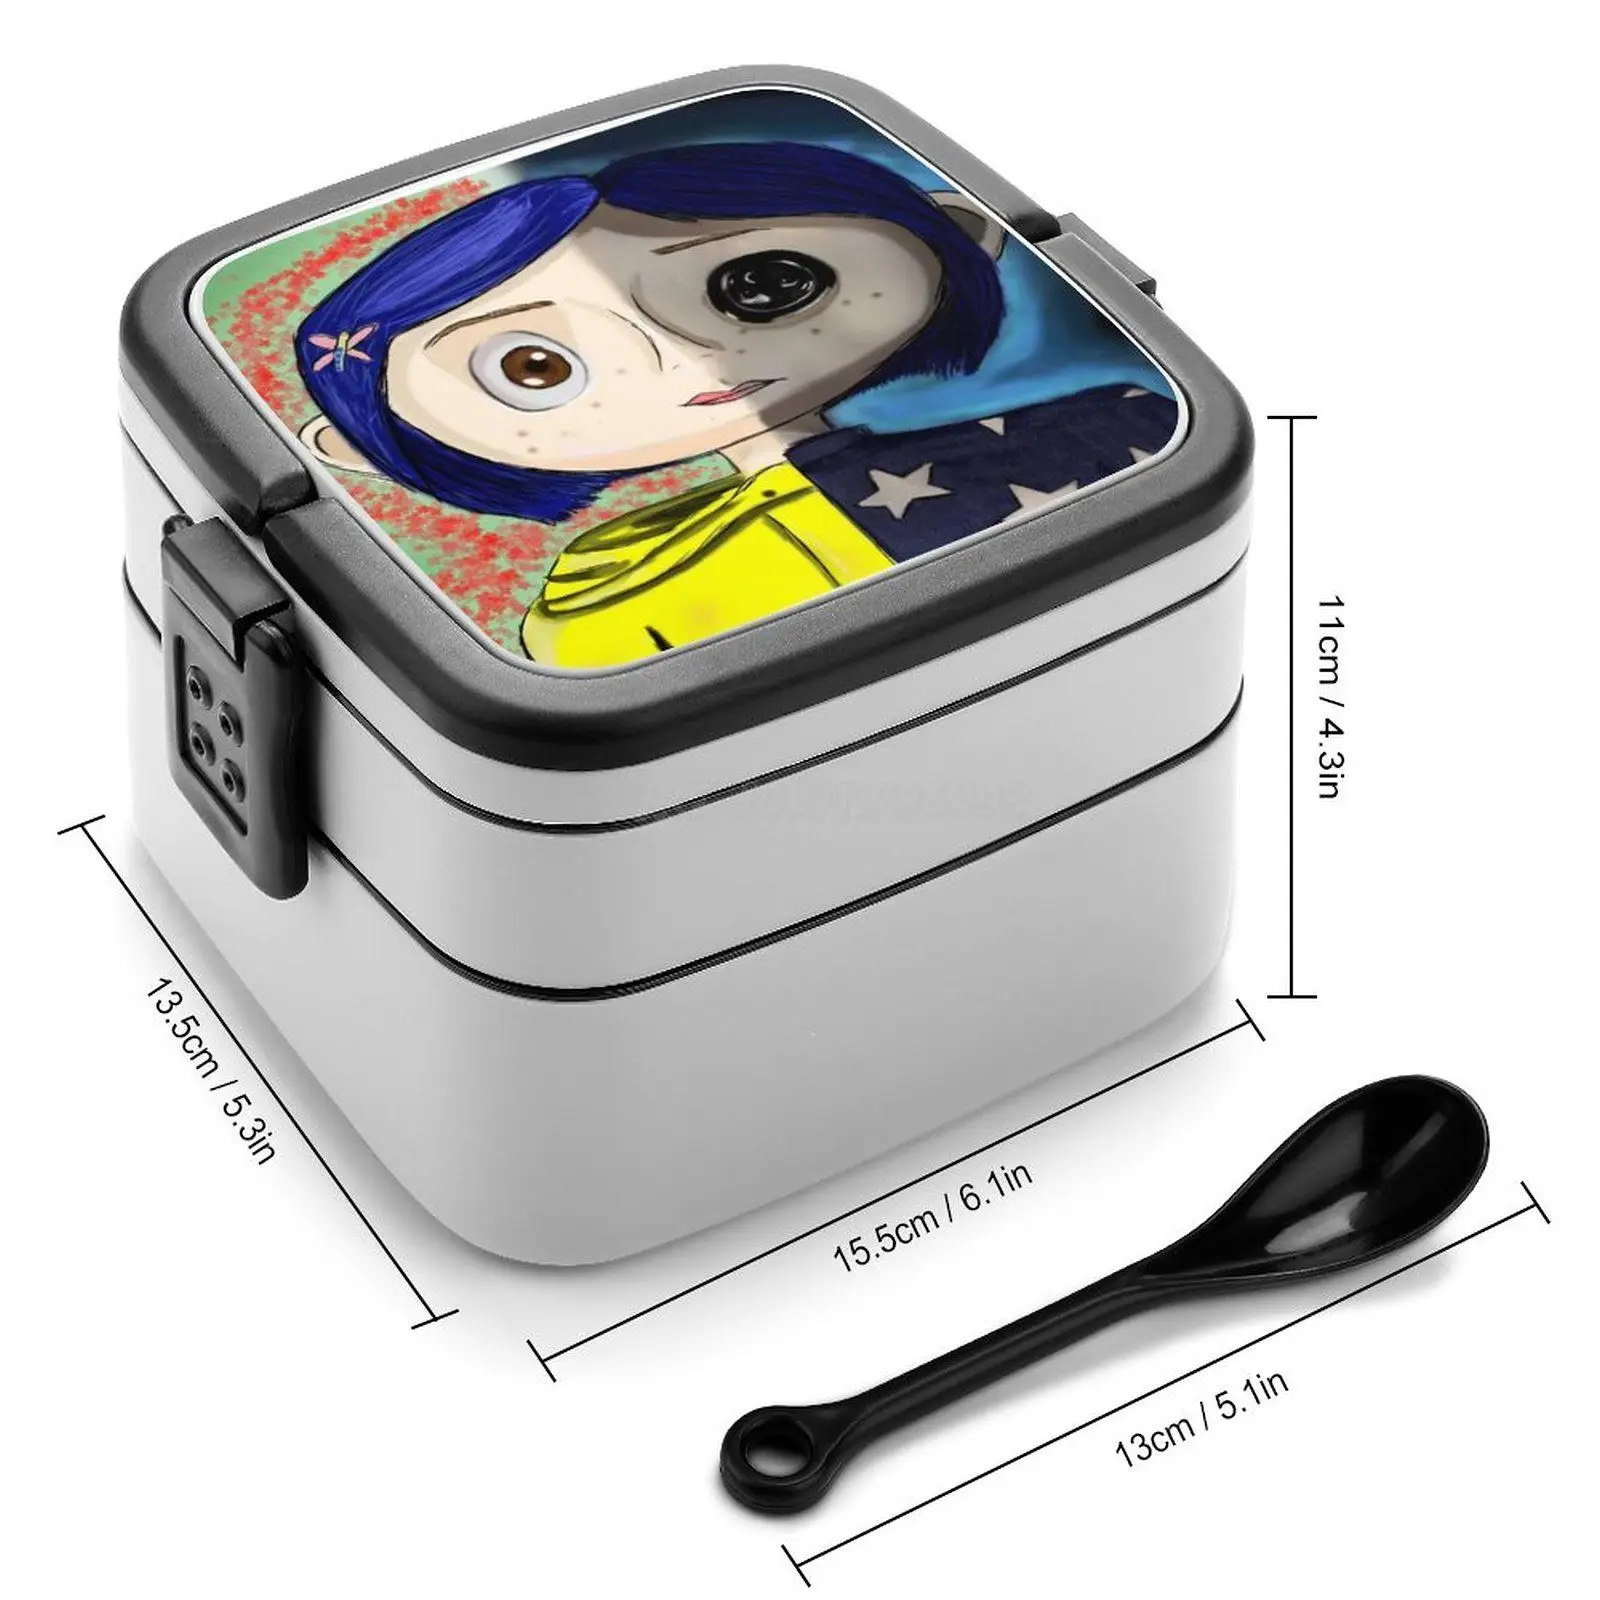 https://ae01.alicdn.com/kf/S5074d273e82d4f4d81790dab0ab5a3308/Coraline-Collection-Double-Layer-Bento-Box-Portable-Lunch-Box-For-Kids-School-Coraline-Coraline-Coraline-Movies.jpg